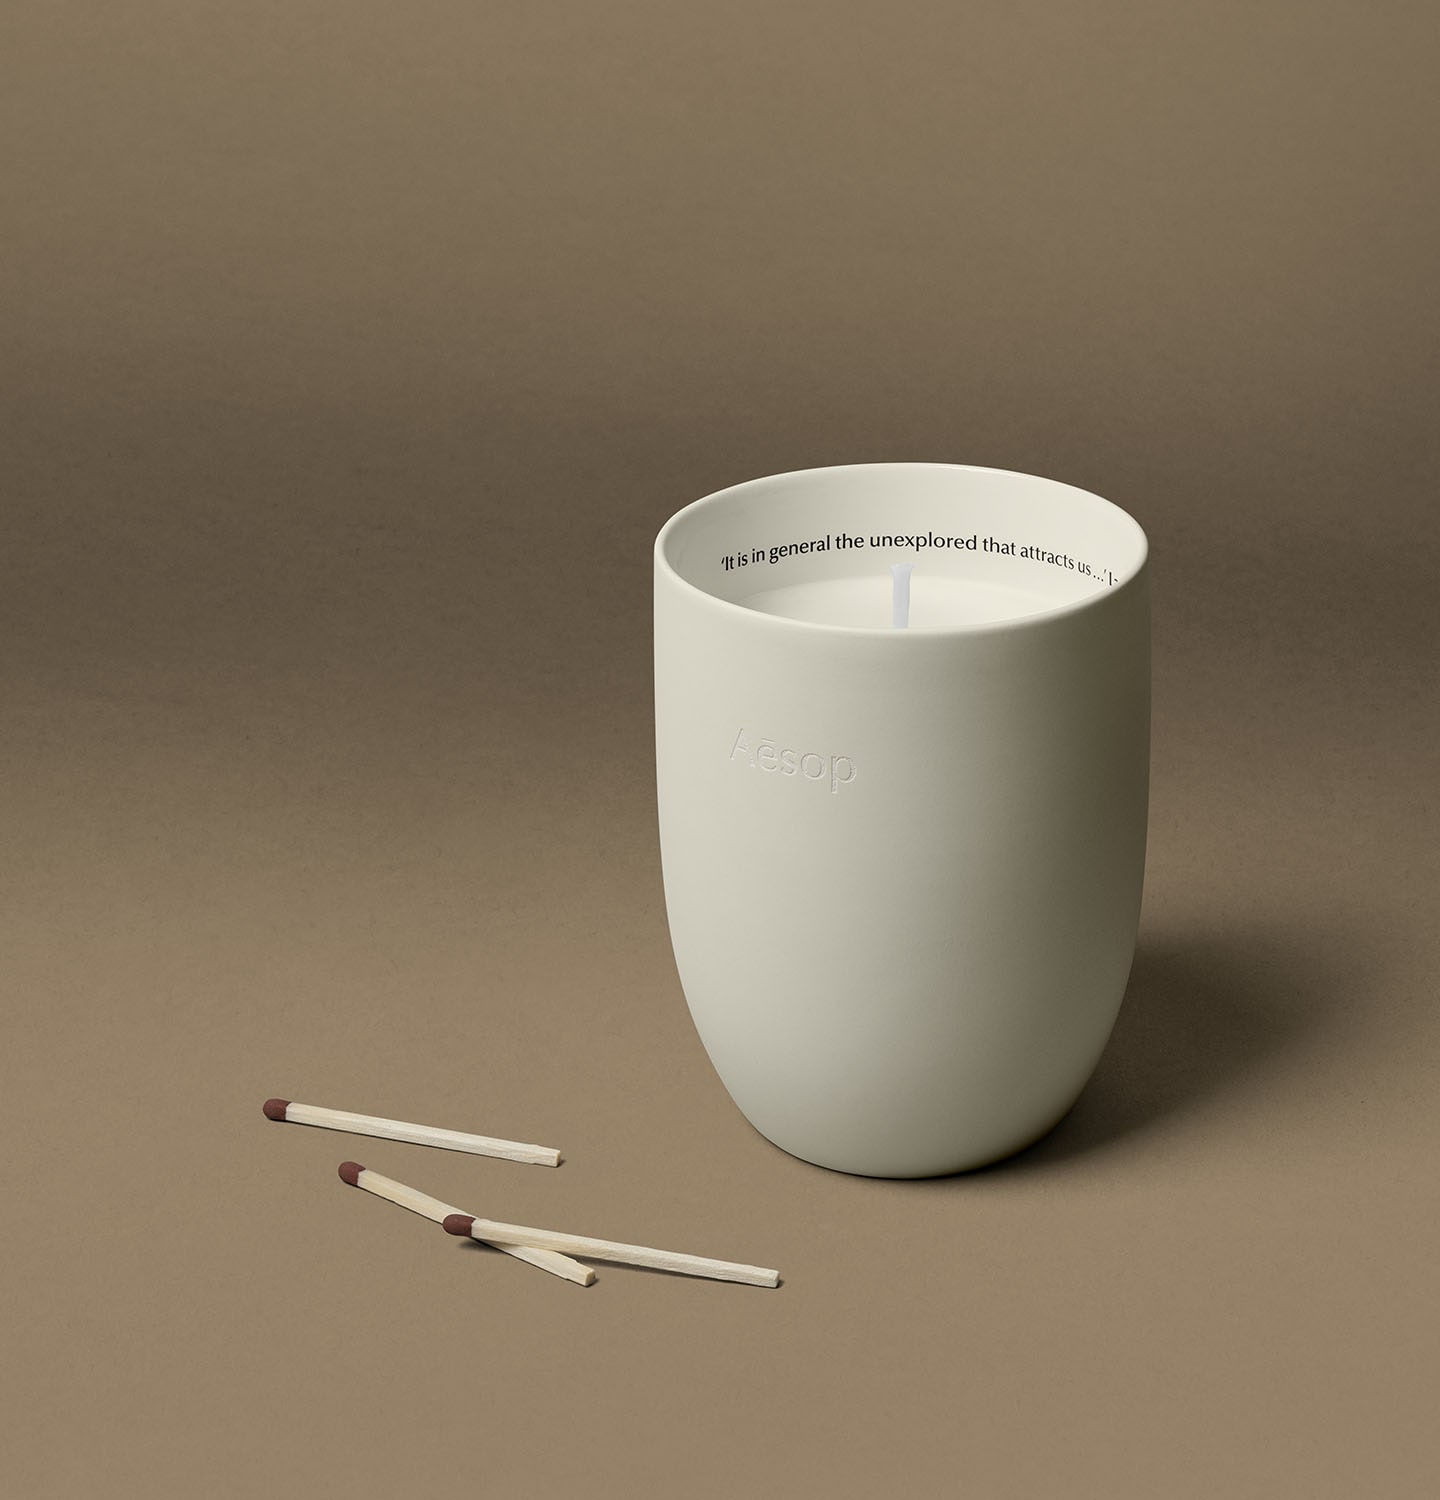 Candle housed in a ceramic vessel, alongside three matchsticks.